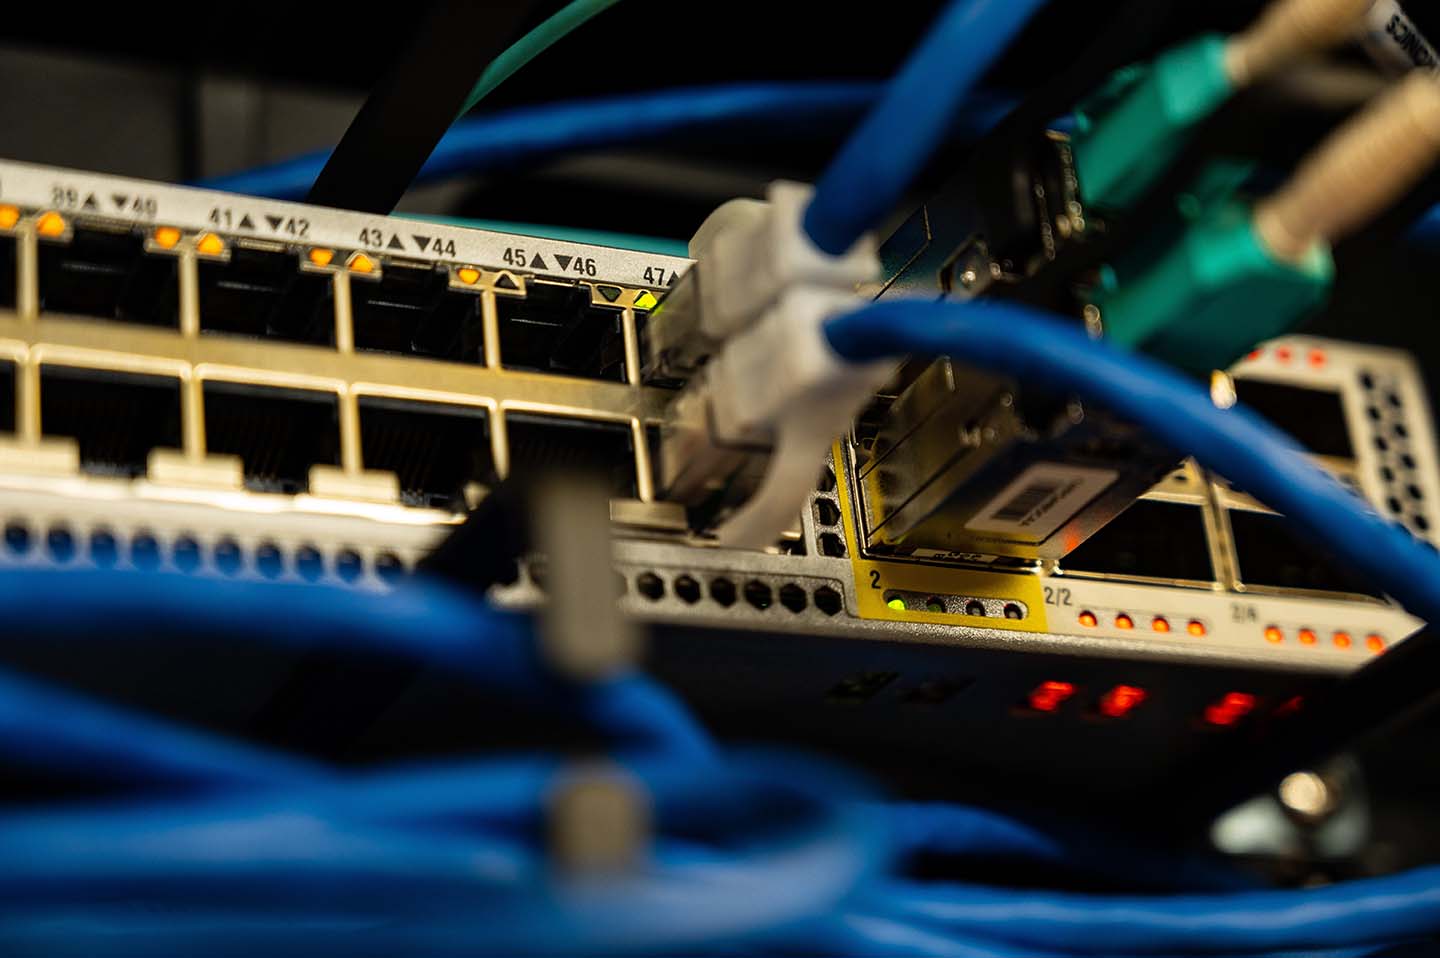 Photo of Network Switch by Brett Sayles from Pexels